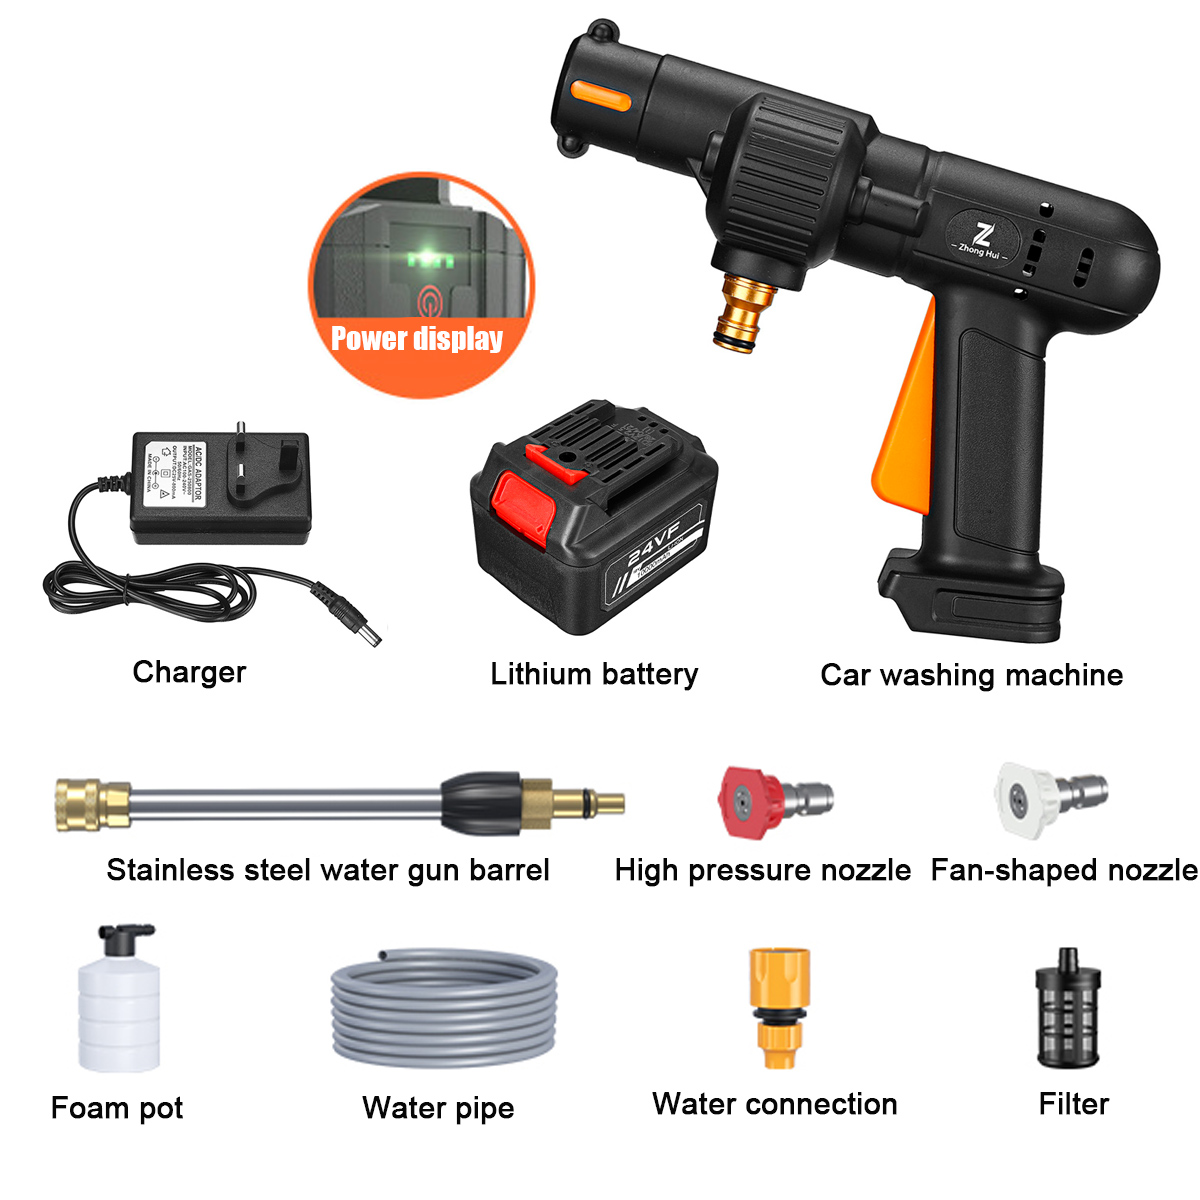 24V-Wireless-Car-Waher-10000mAH-With-Battery-Indicator-Electric-High-Pressure-Washer-Car-Washing-Mac-1856695-5